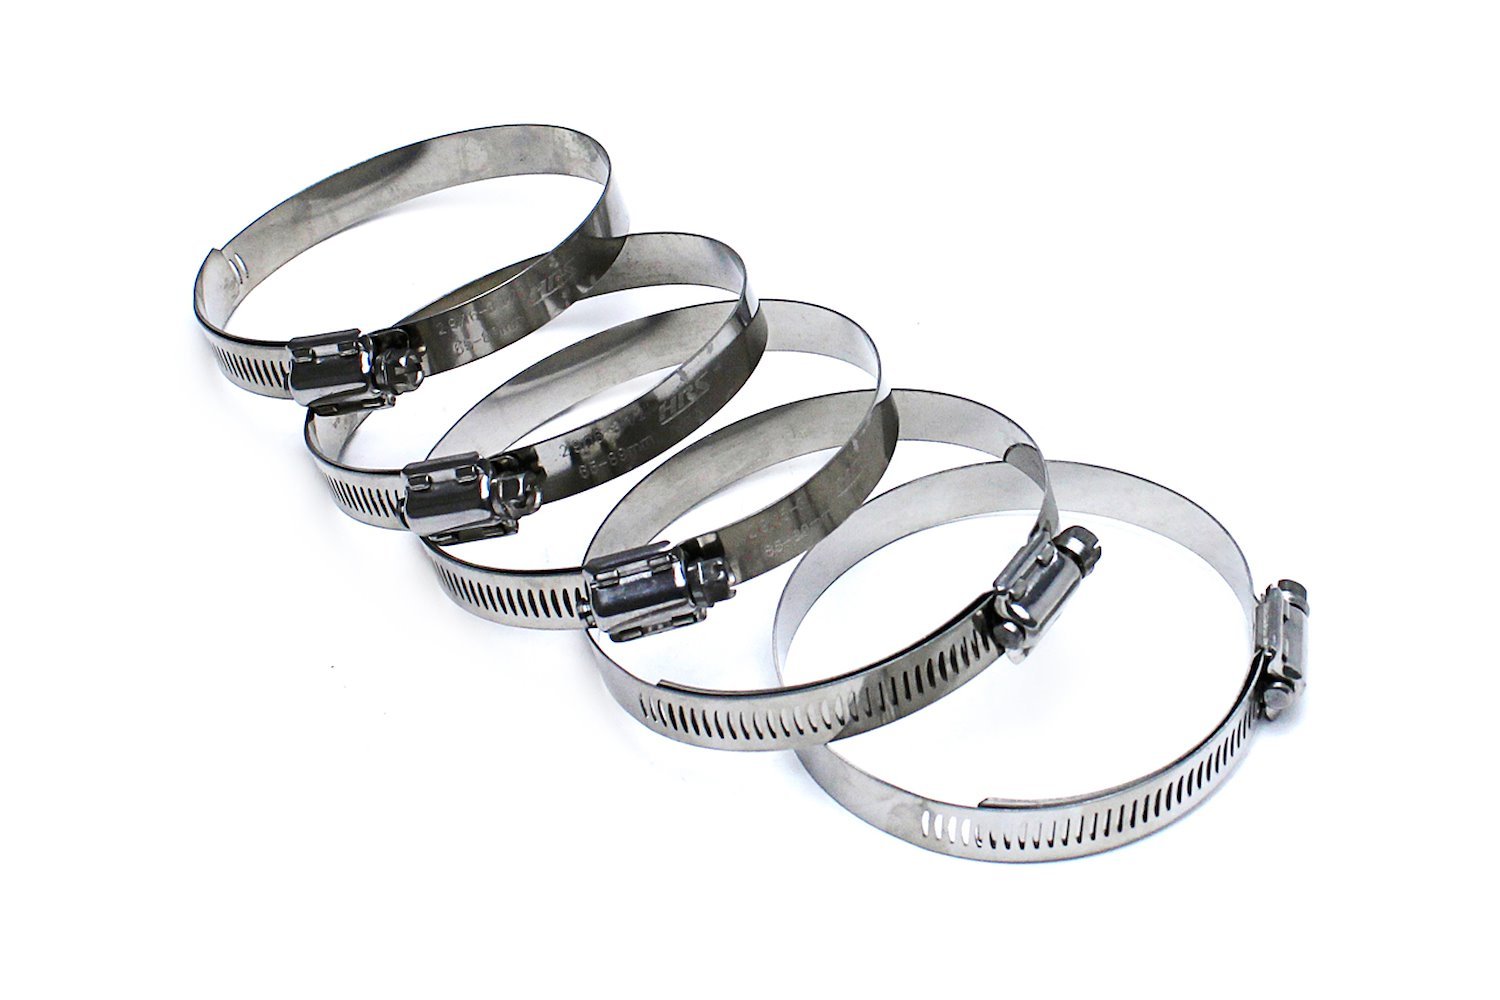 SSWC-105-127x5 Stainless Steel Worm Gear Hose Clamp, Effective Range: 4-1/8 in.- 5 in., 5Pc